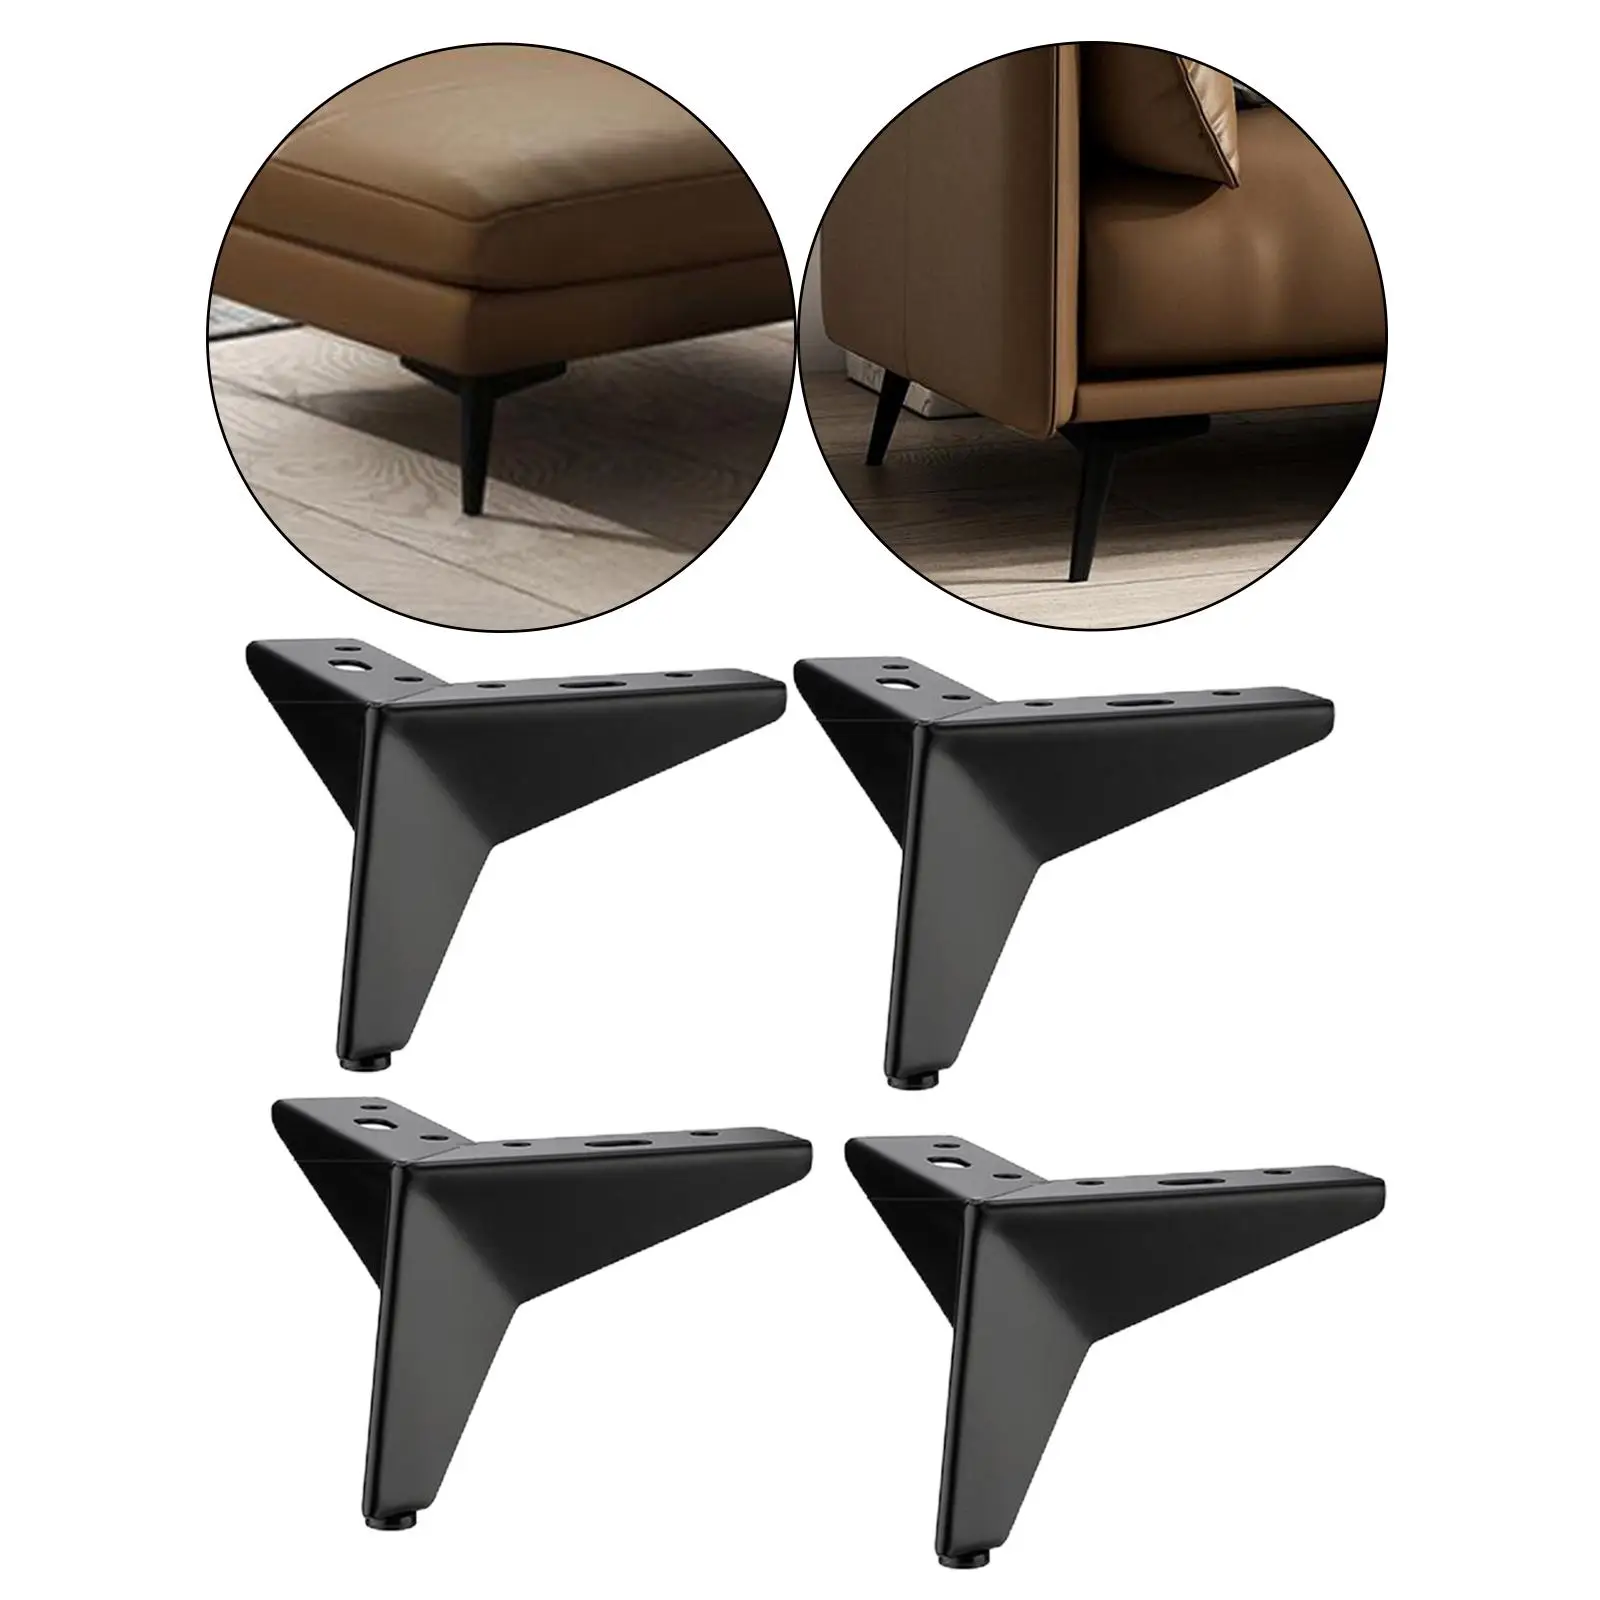 4-Pack Iron Triangle Furniture Legs Replacement Legs Modern Style Loveseat Couch Leg for Chair Desk, TV Cupboard, Coffee Table,